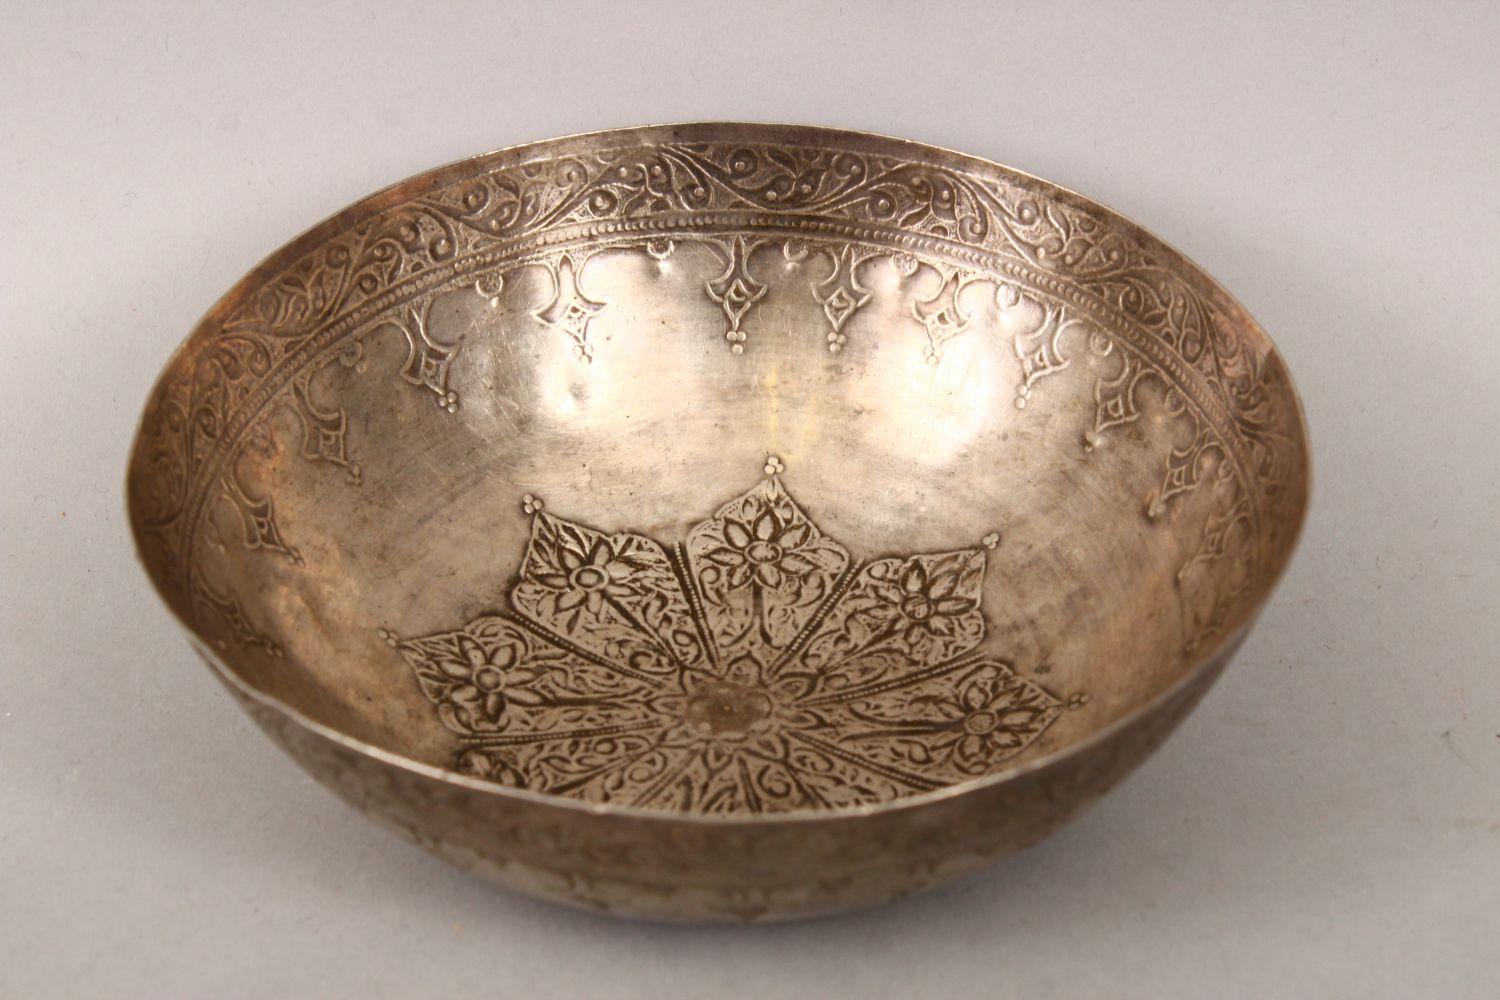 AN 19TH CENTURY ISLAMIC MALAYSIAN SILVER BOWL, the exterior engraved with scrolling foliate - Image 2 of 3